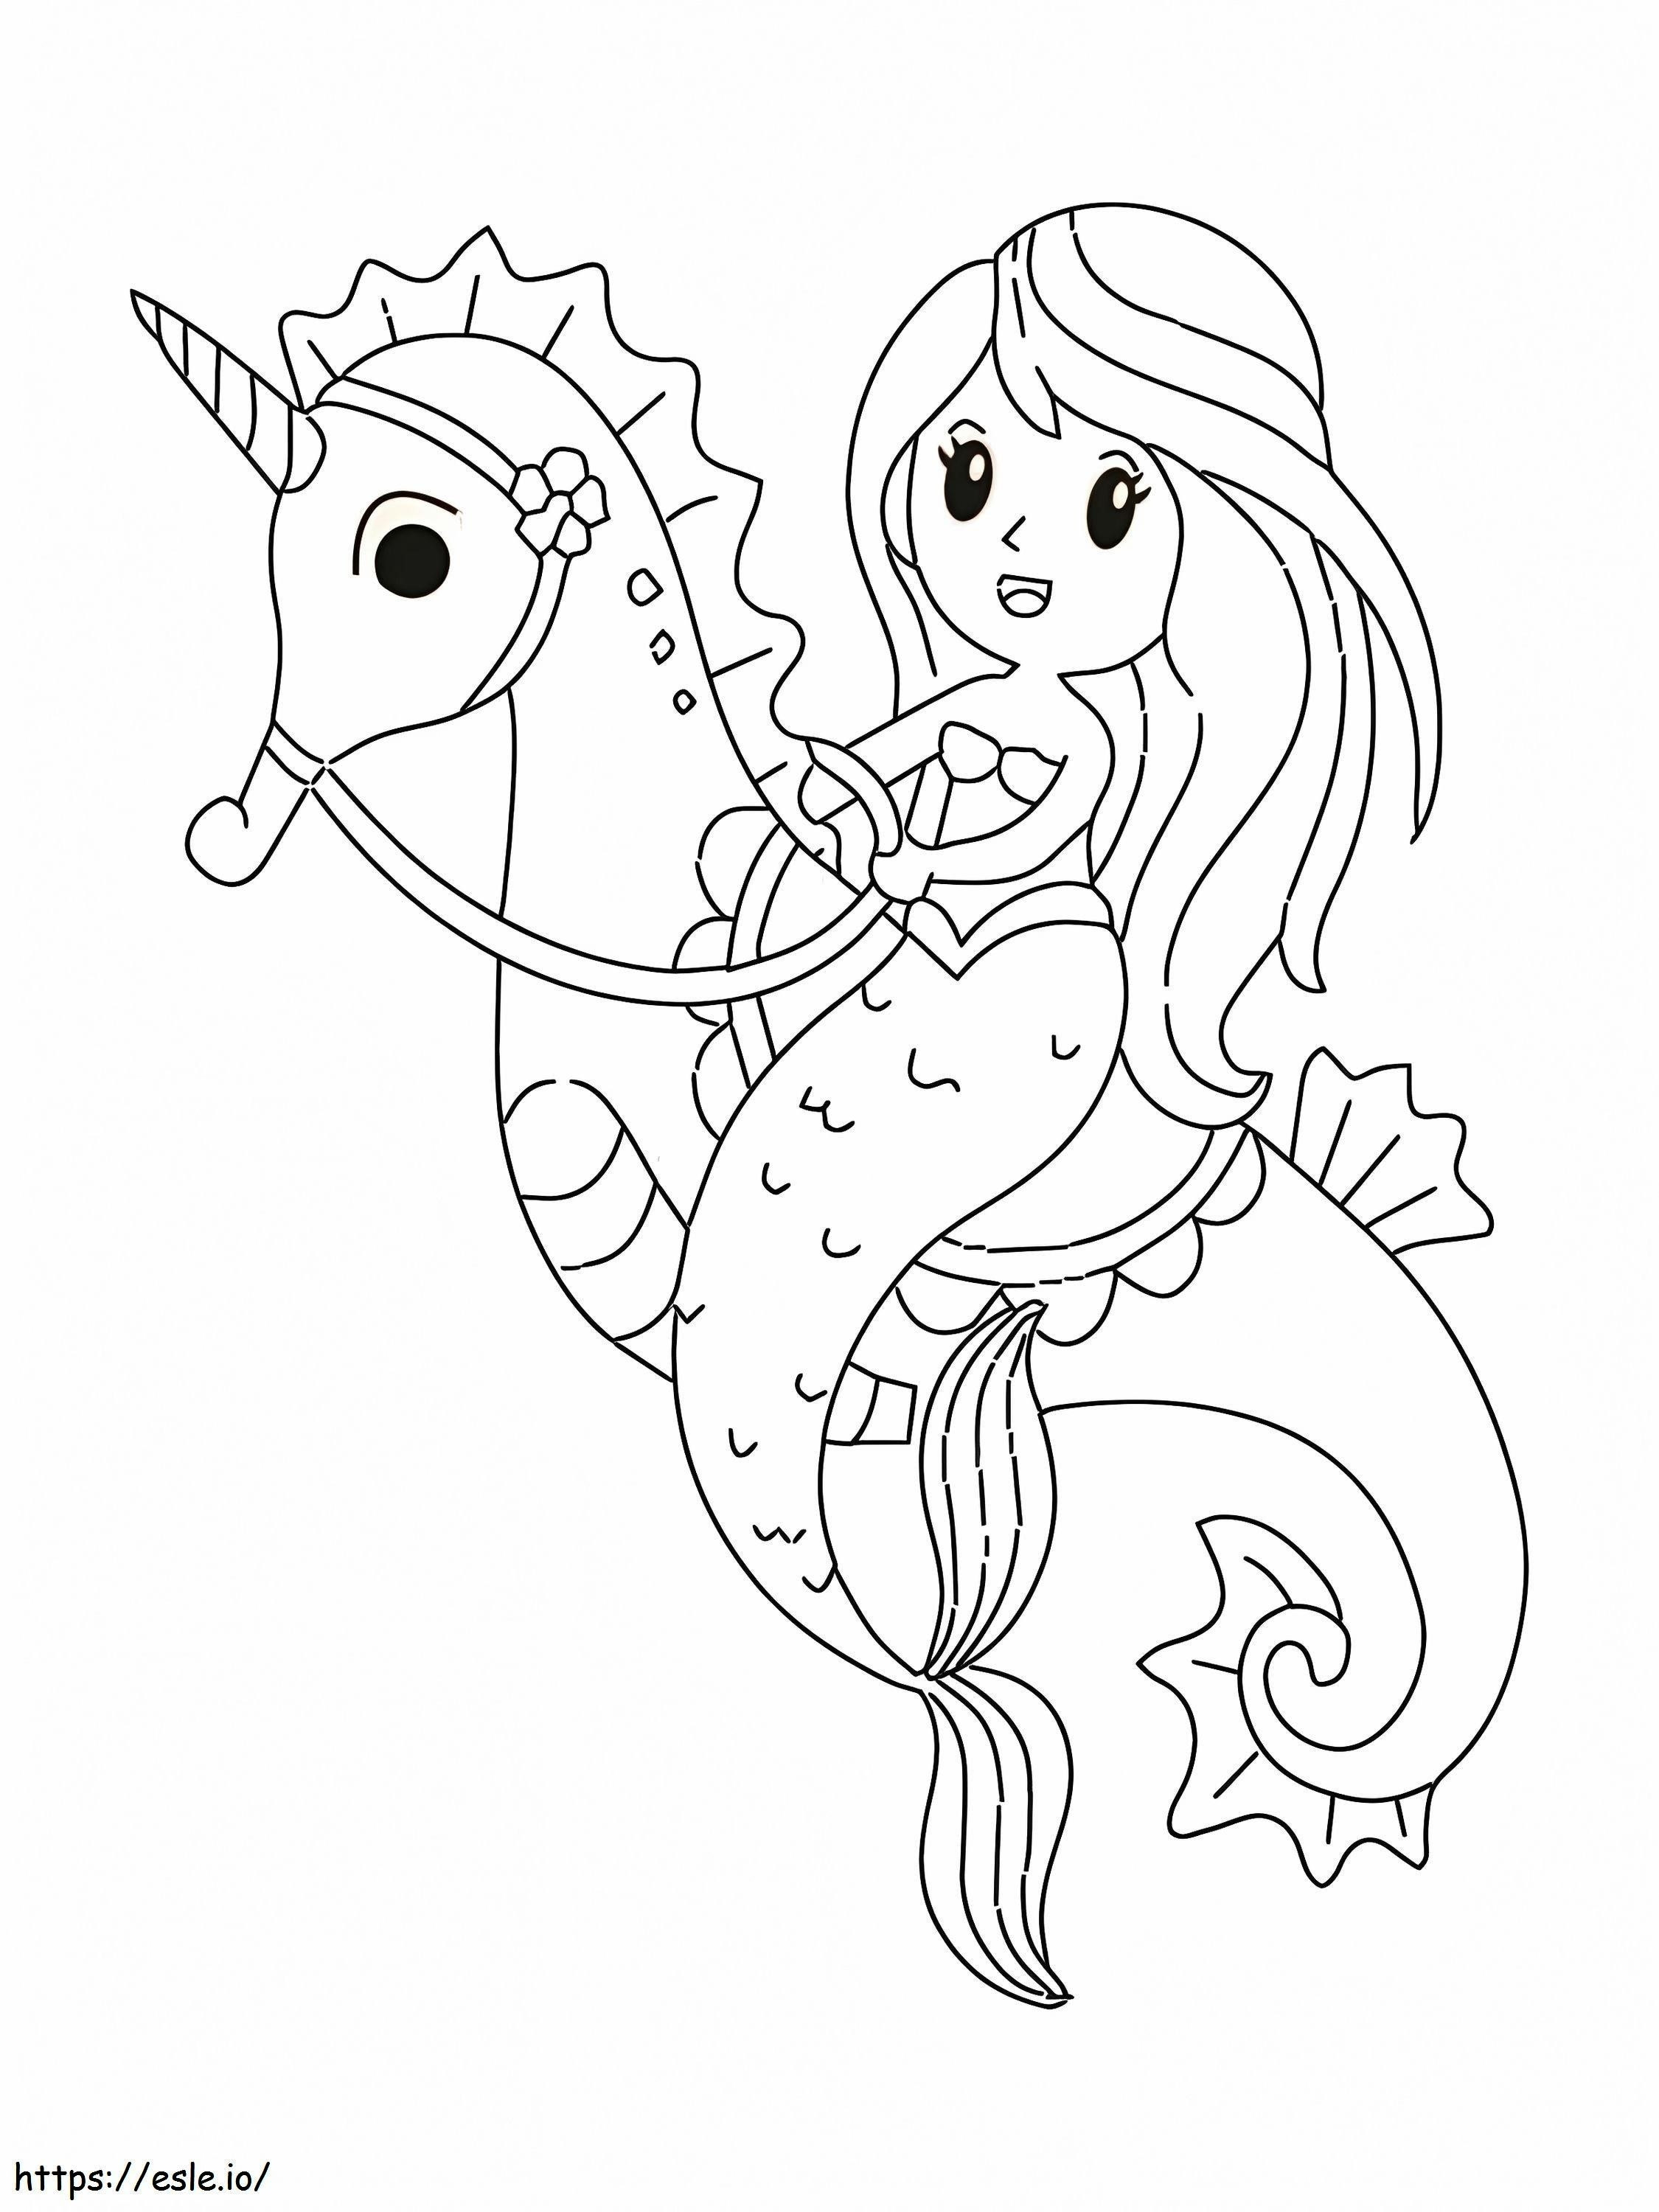 Cute Mermaid And Seahorse coloring page